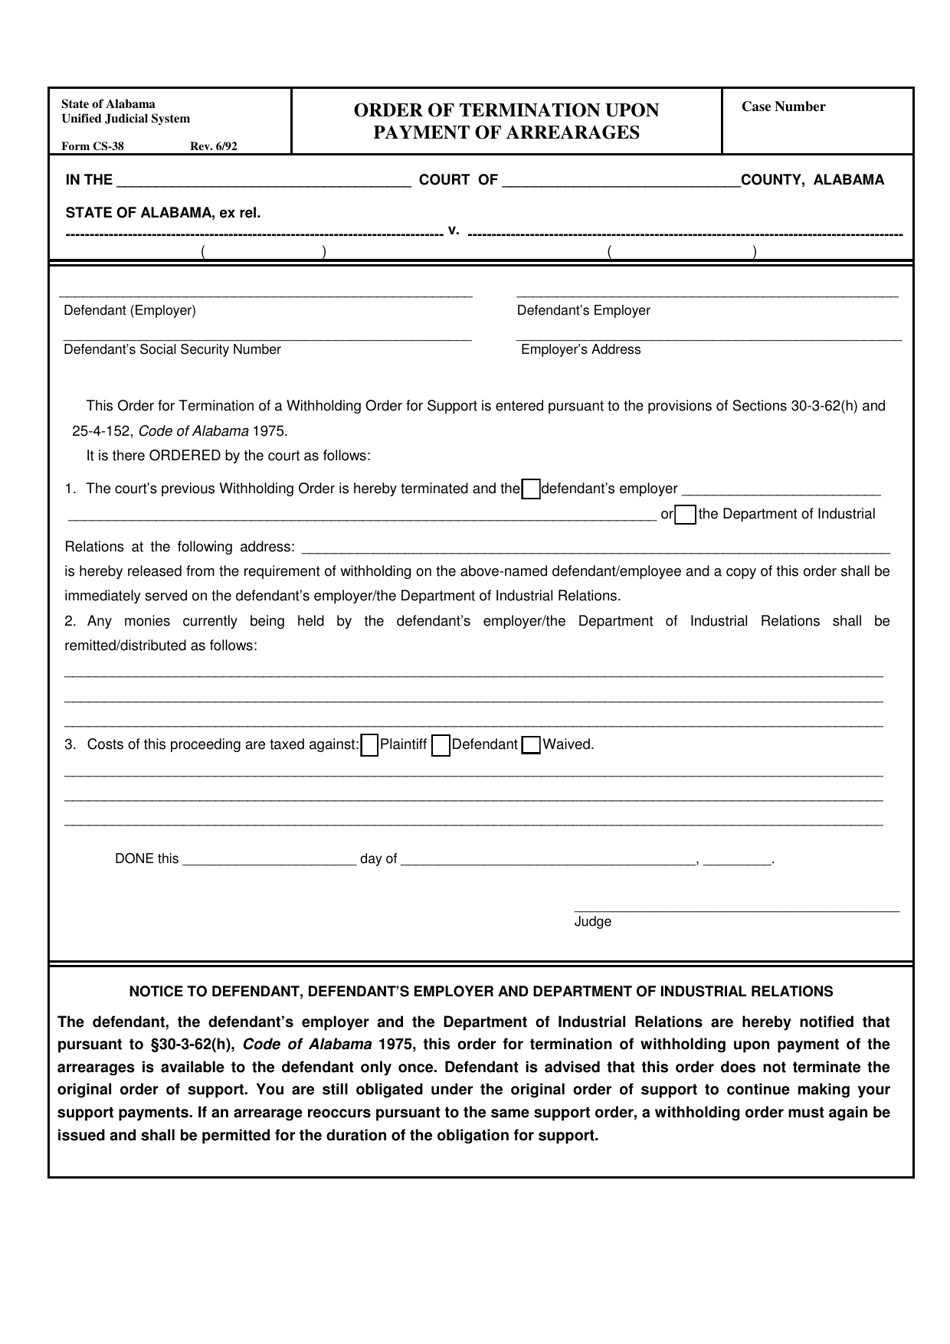 Form CS-38 Order of Termination Upon Payment of Arrearages - Alabama, Page 1